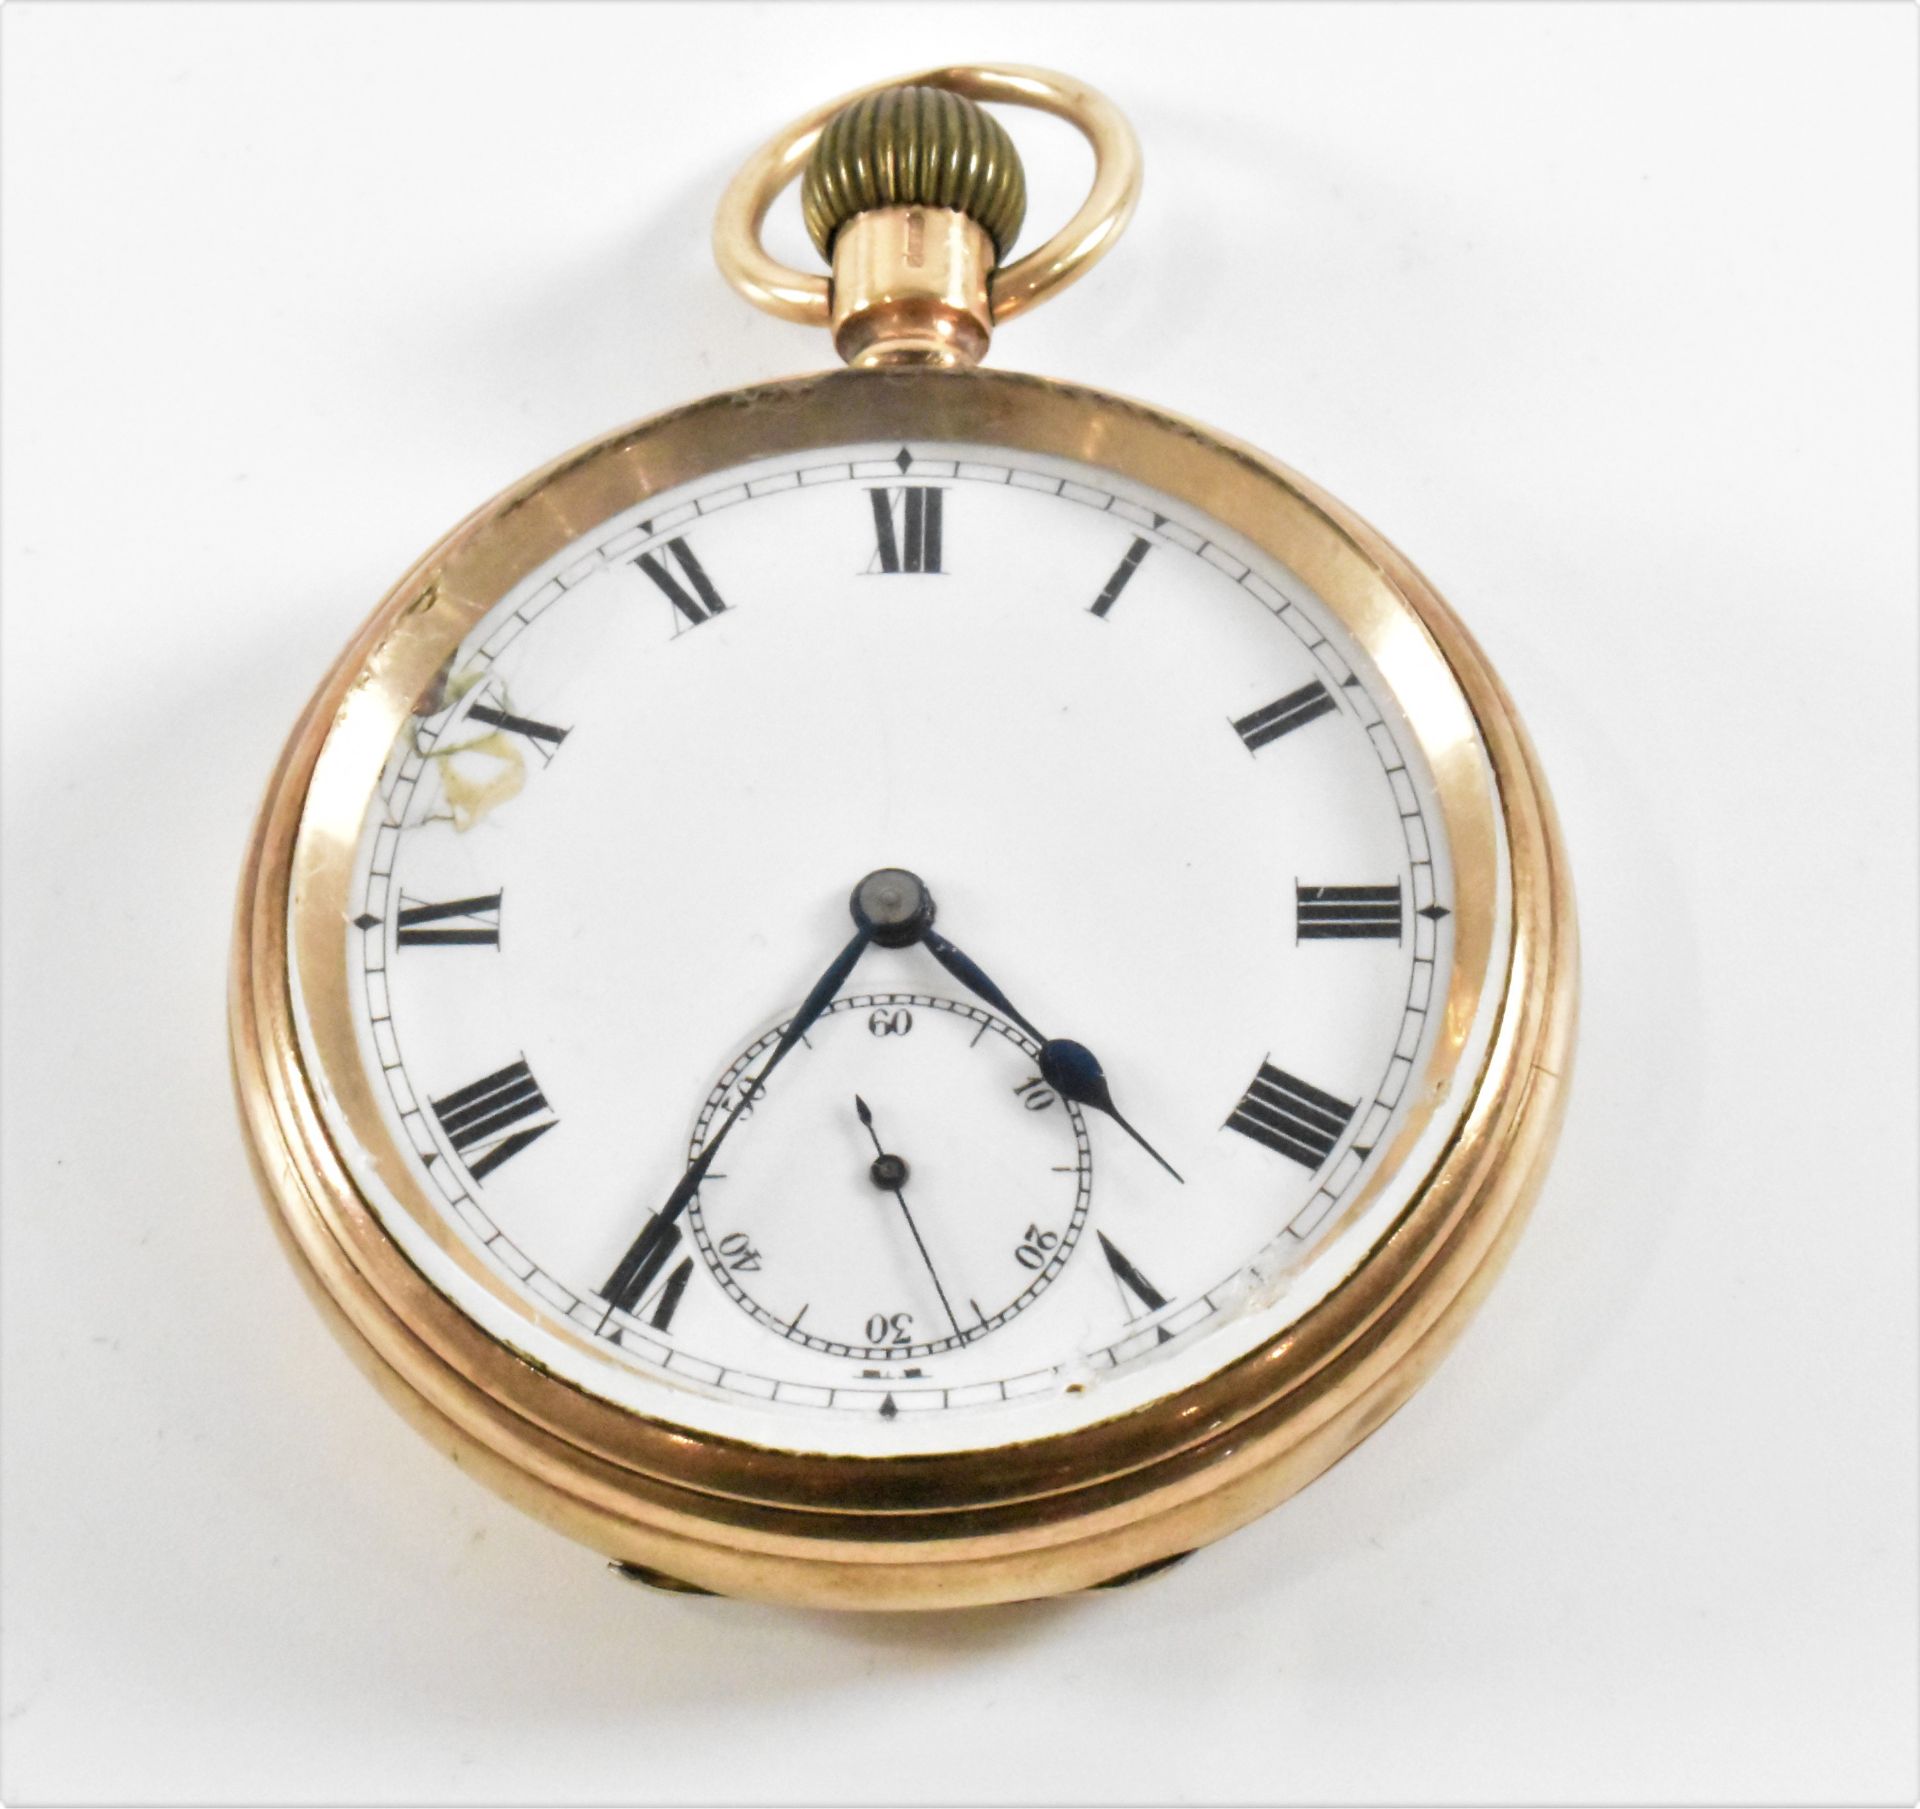 ANTIQUE 9CT GOLD OEPN FACE POCKET WATCH